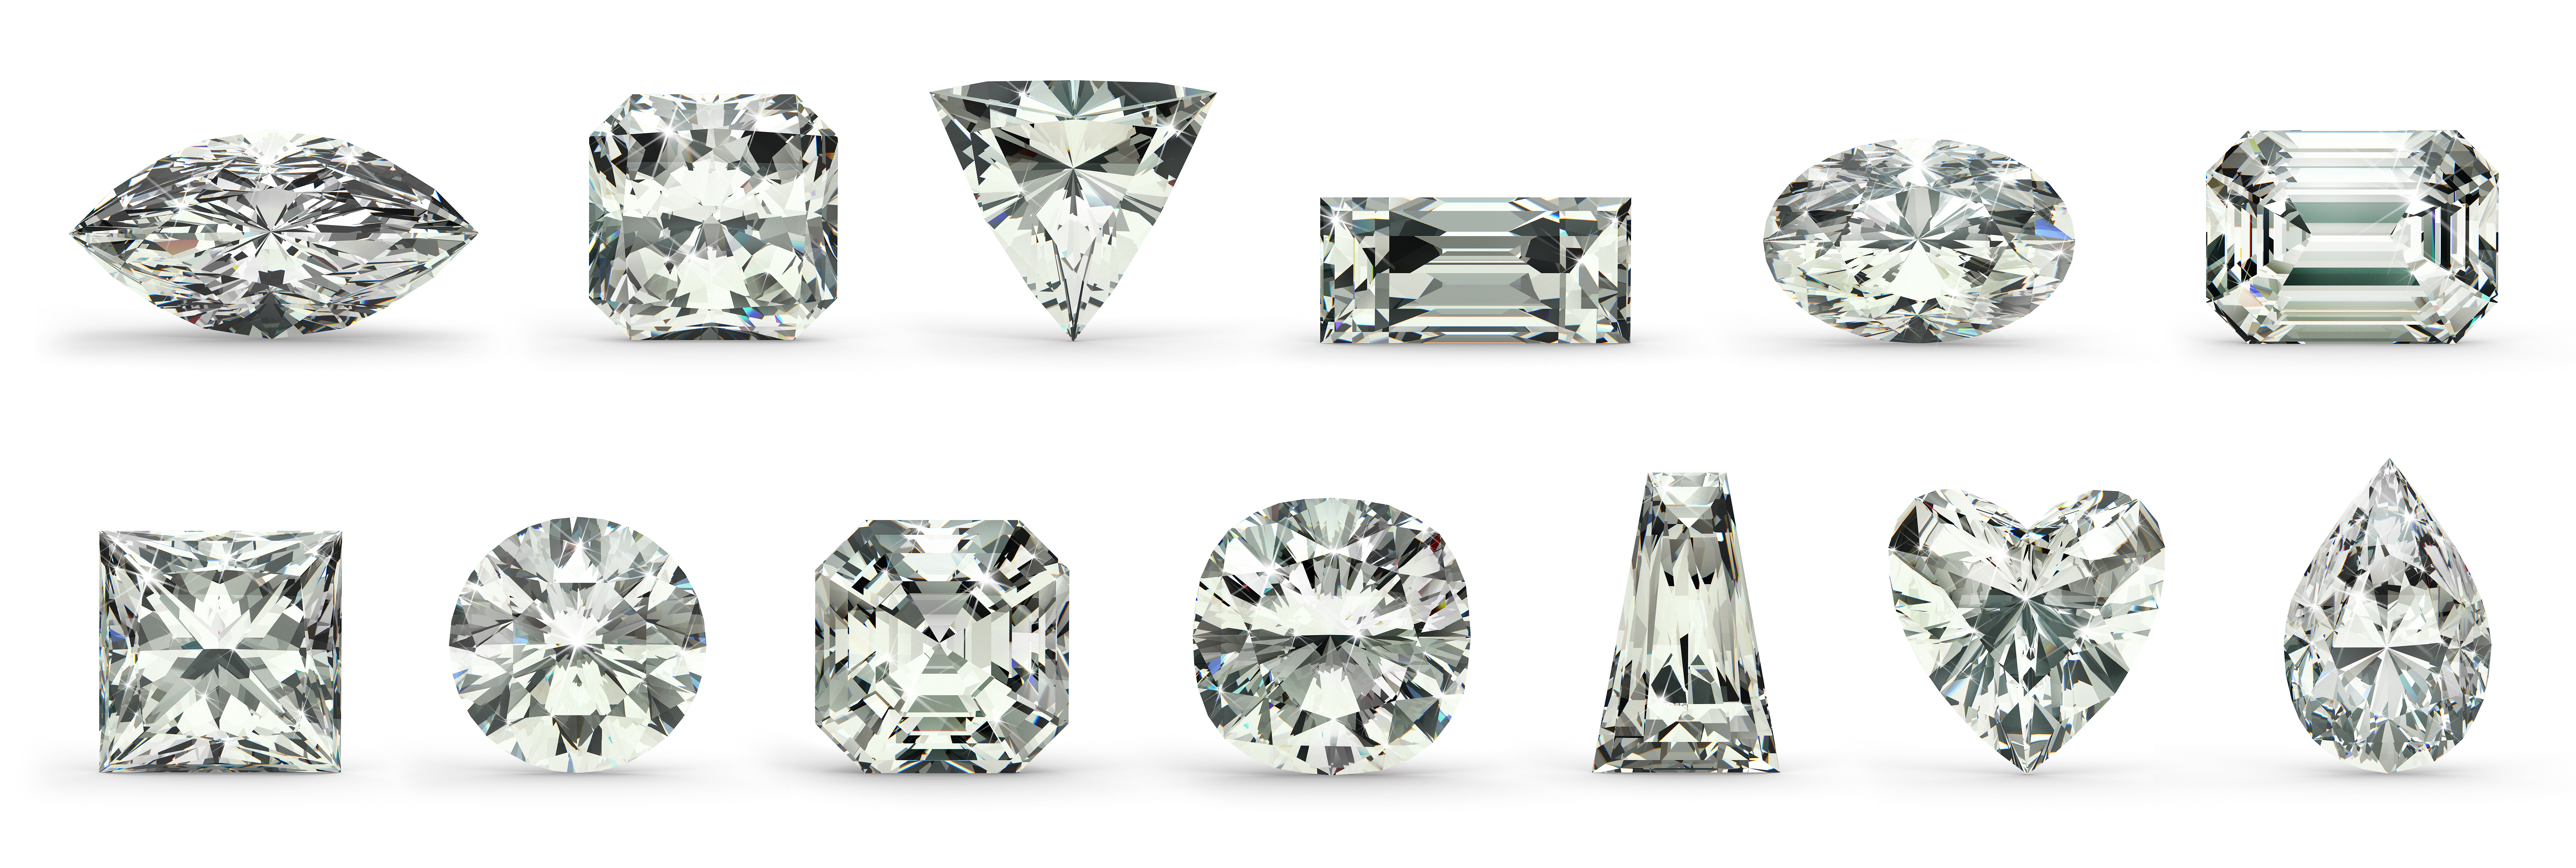 Twelve different diamond shapes (or cuts) that can be used for engagement rings.